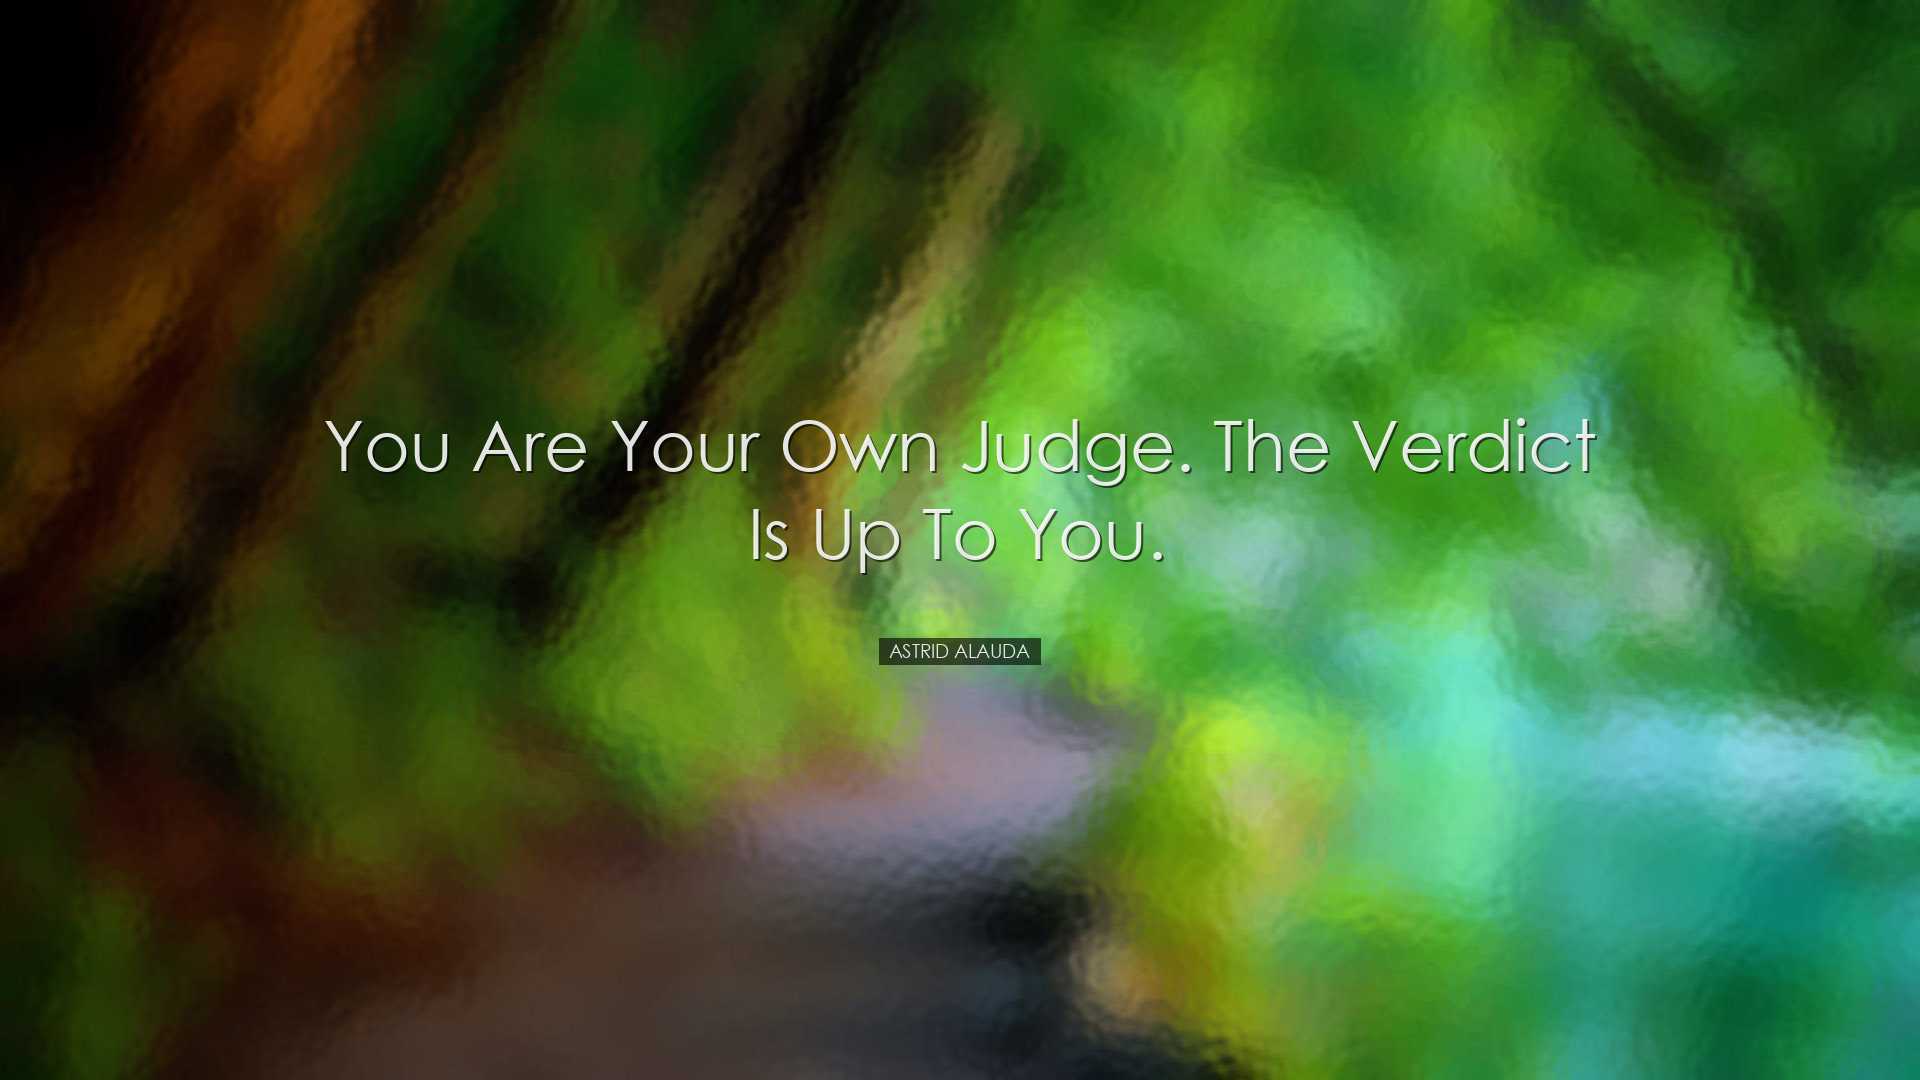 You are your own judge. The verdict is up to you. - Astrid Alauda